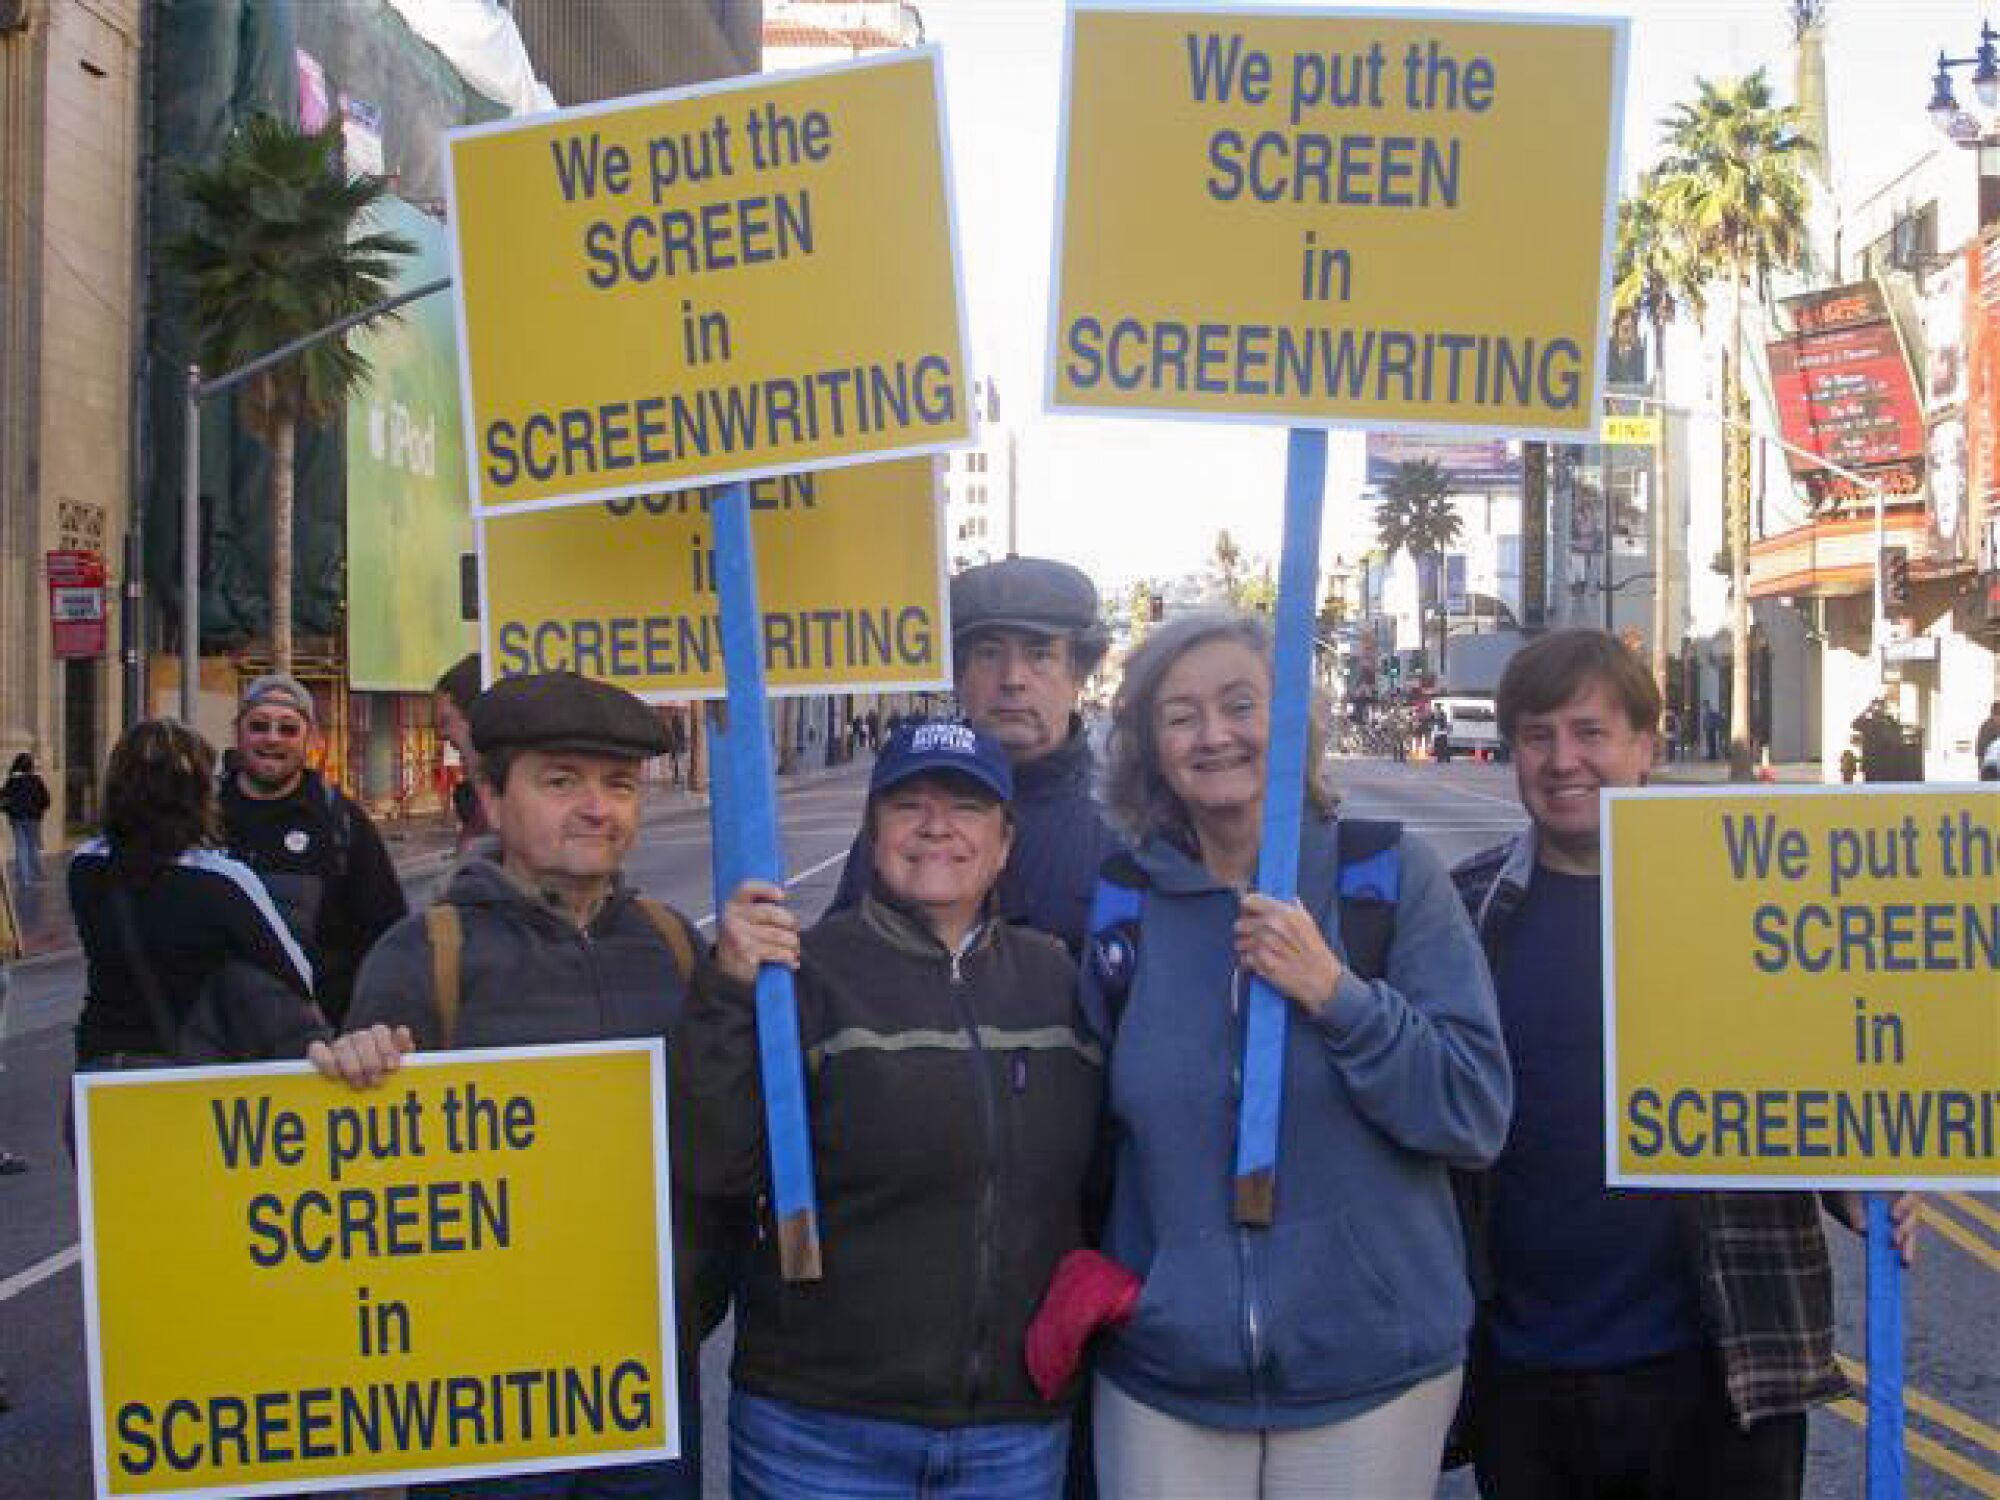 people hold yellow picket signs that say "we put the screen in screenwriting"